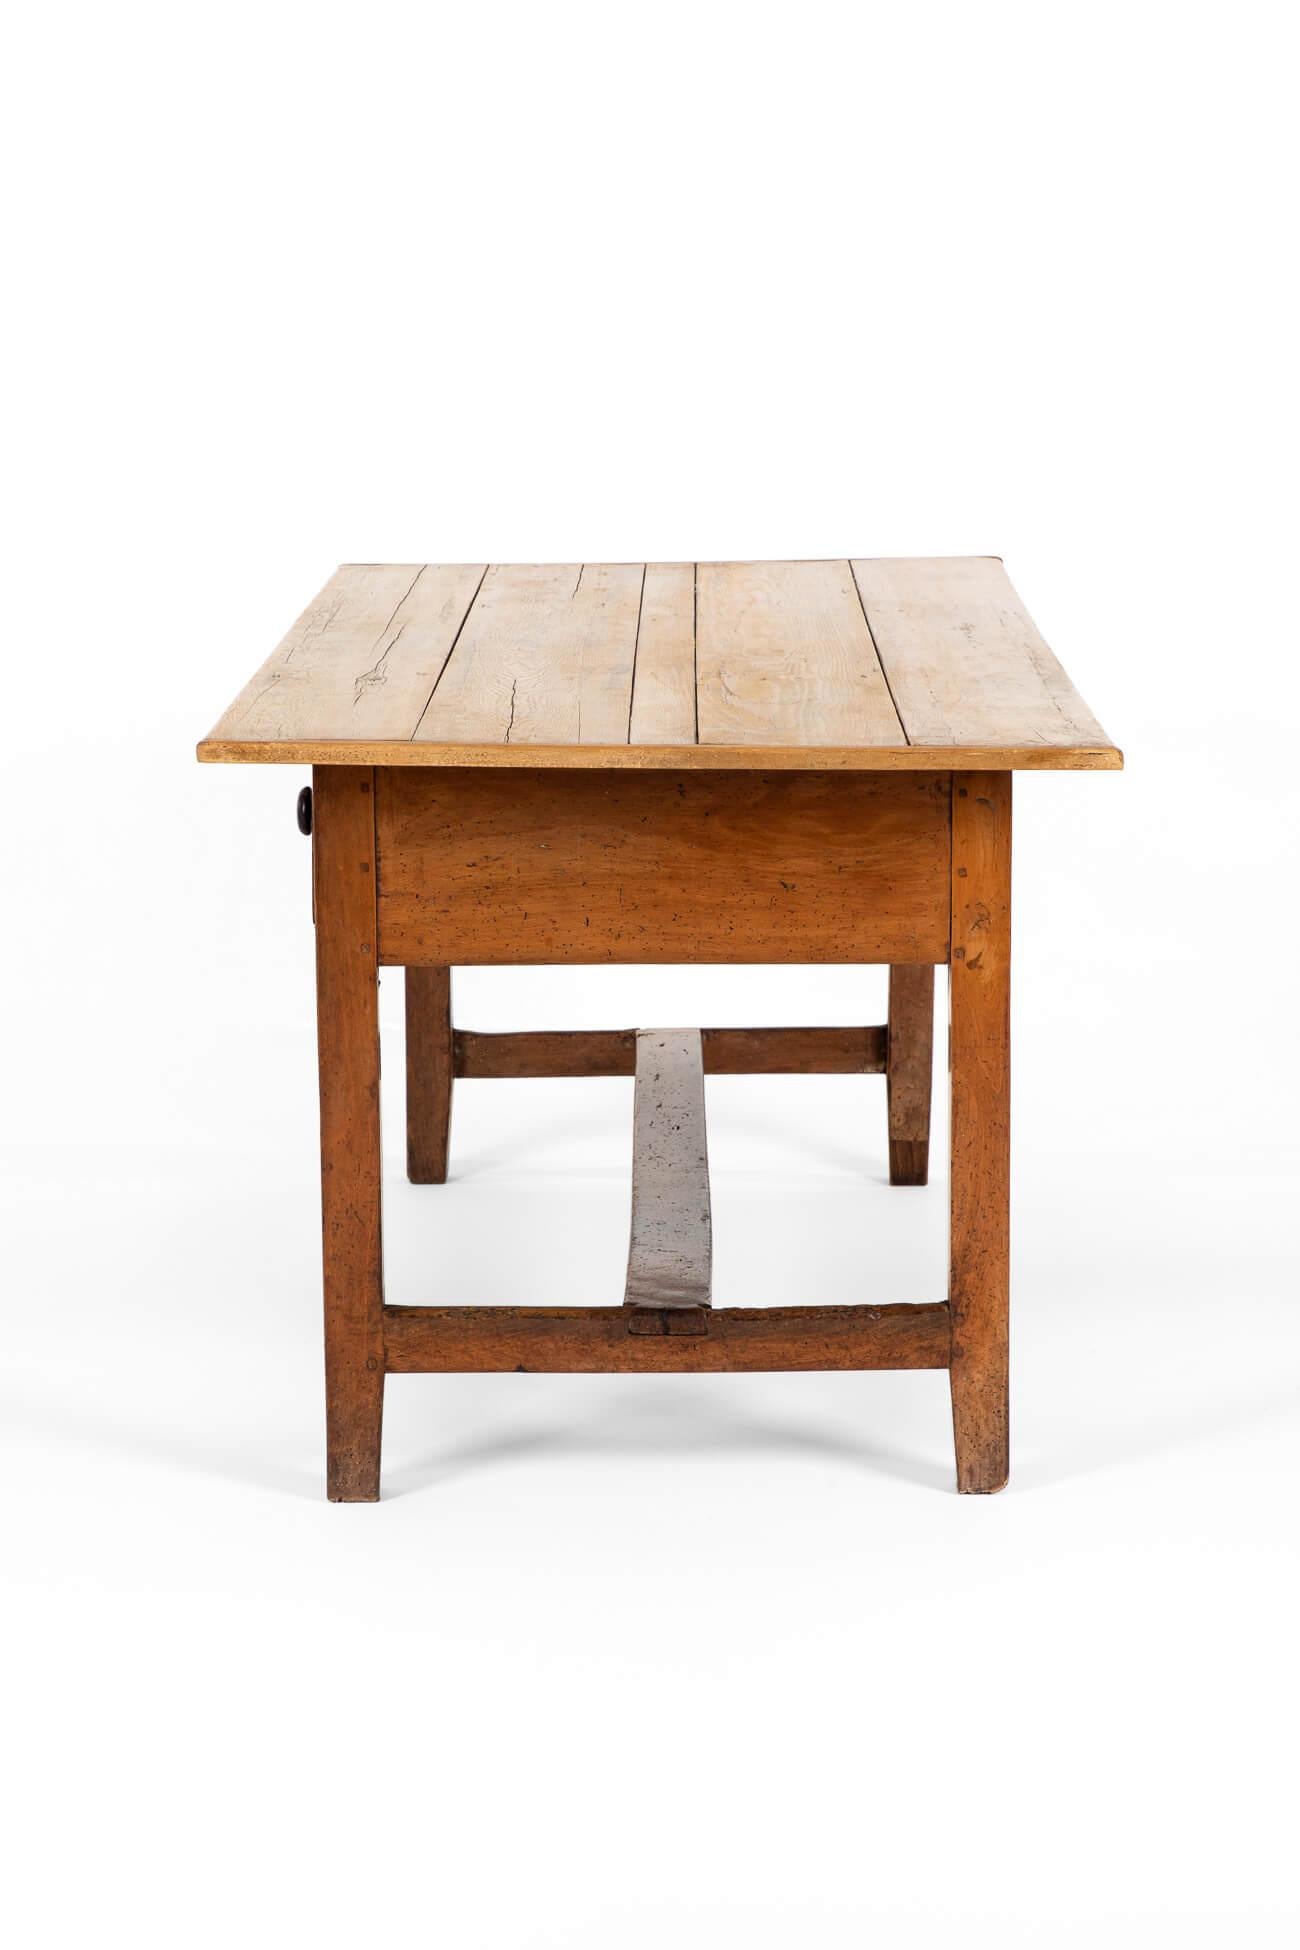 antique dairy table